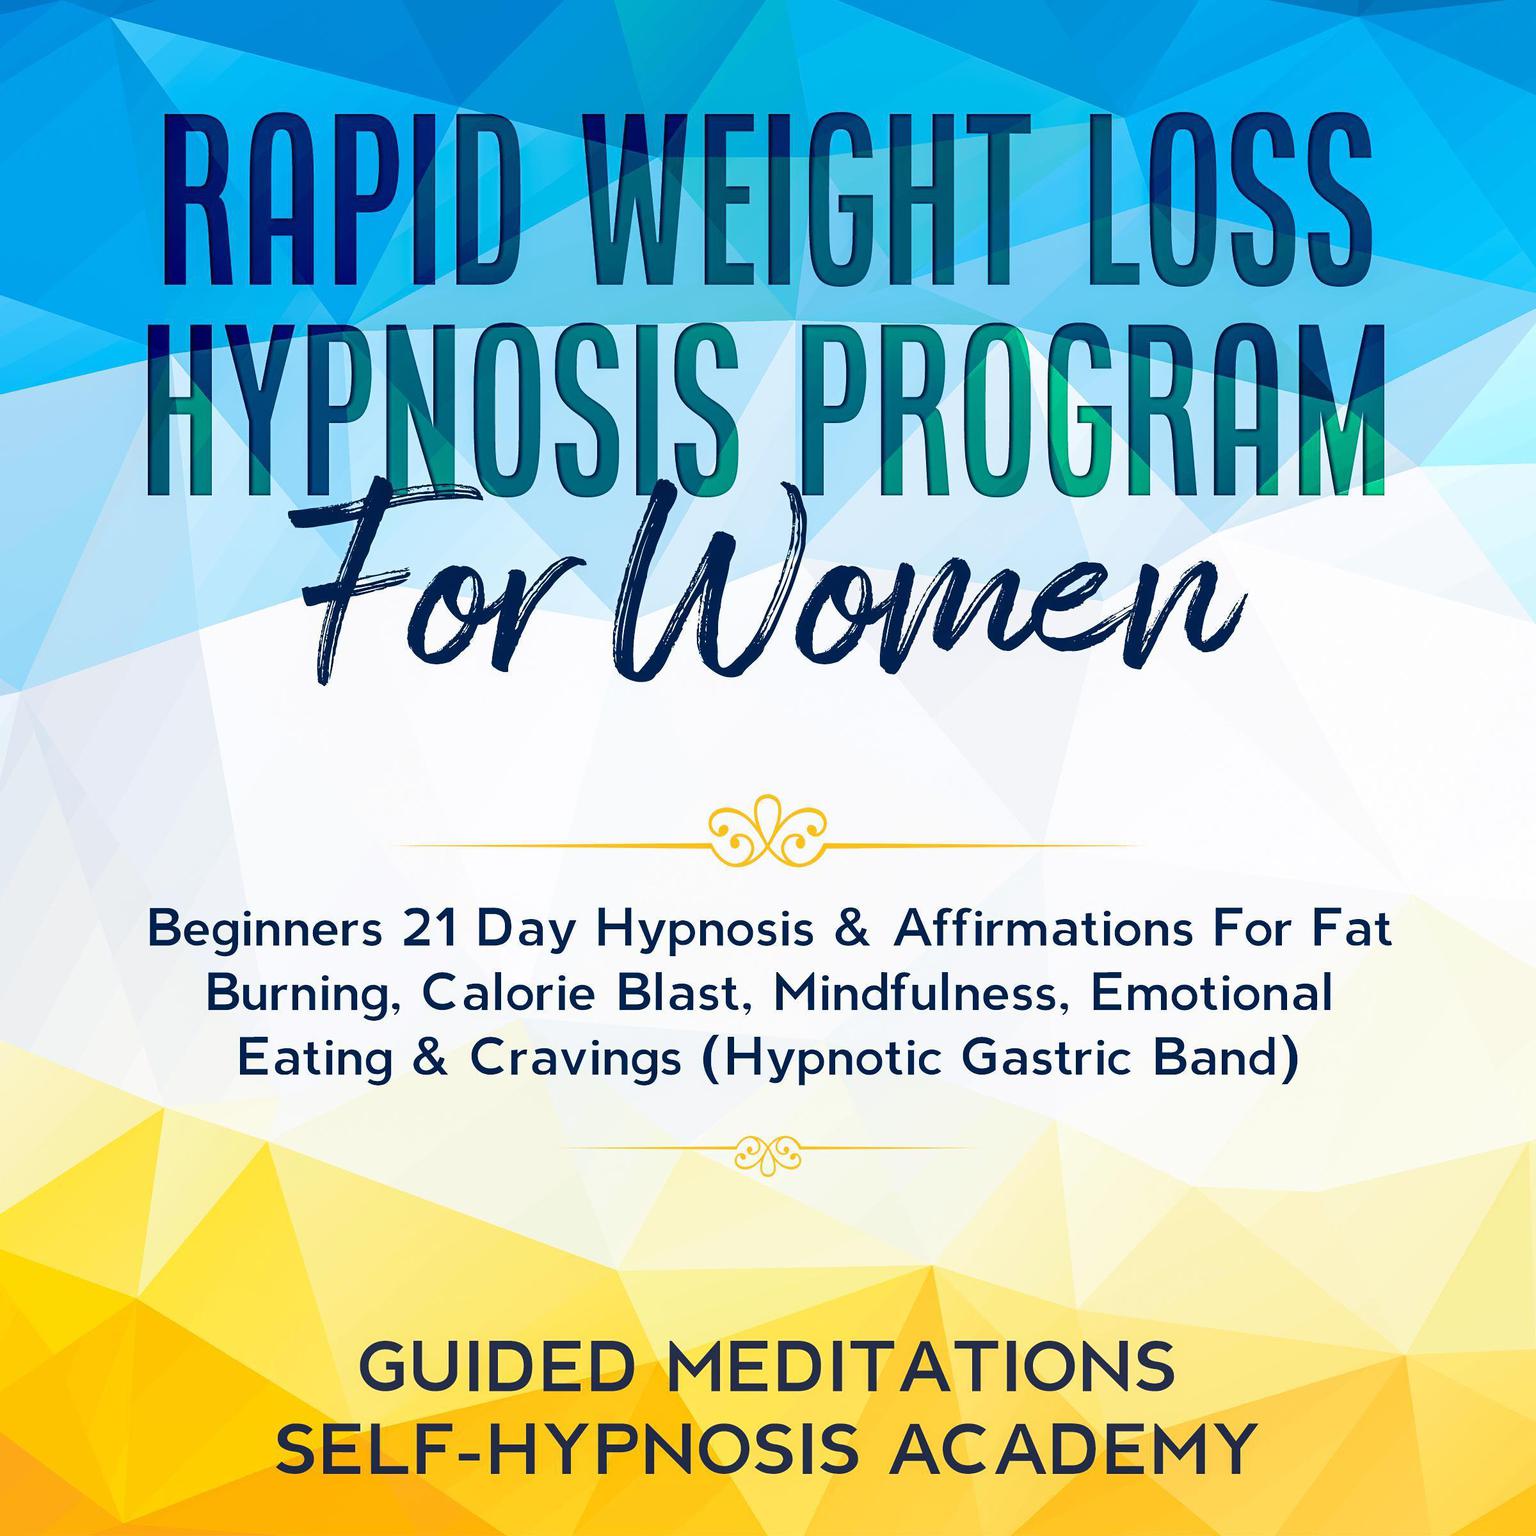 Rapid Weight Loss Hypnosis Program For Women Beginners 21 Day Hypnosis & Affirmations For Fat Burning, Calorie Blast, Mindfulness, Emotional Eating & Cravings (Hypnotic Gastric Band) Audiobook, by Guided Meditations & Self-Hypnosis Academy